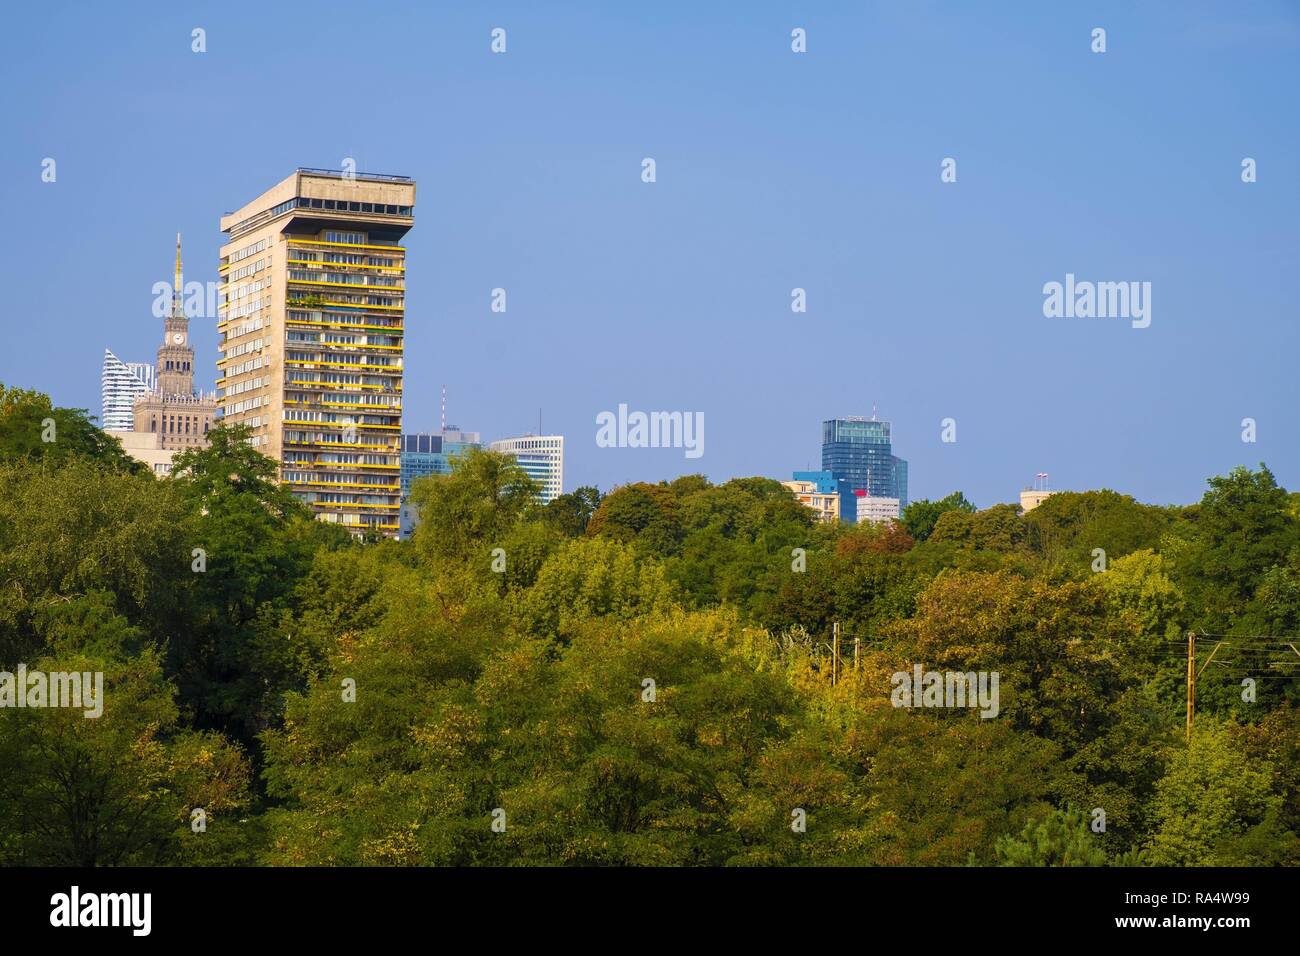 Warsaw, Mazovia / Poland - 2018/09/02: Exterior of the historic Smolna 8 tower, communist residential building developed in 70s of XX century in the Powisle quarter of Warsaw Stock Photo